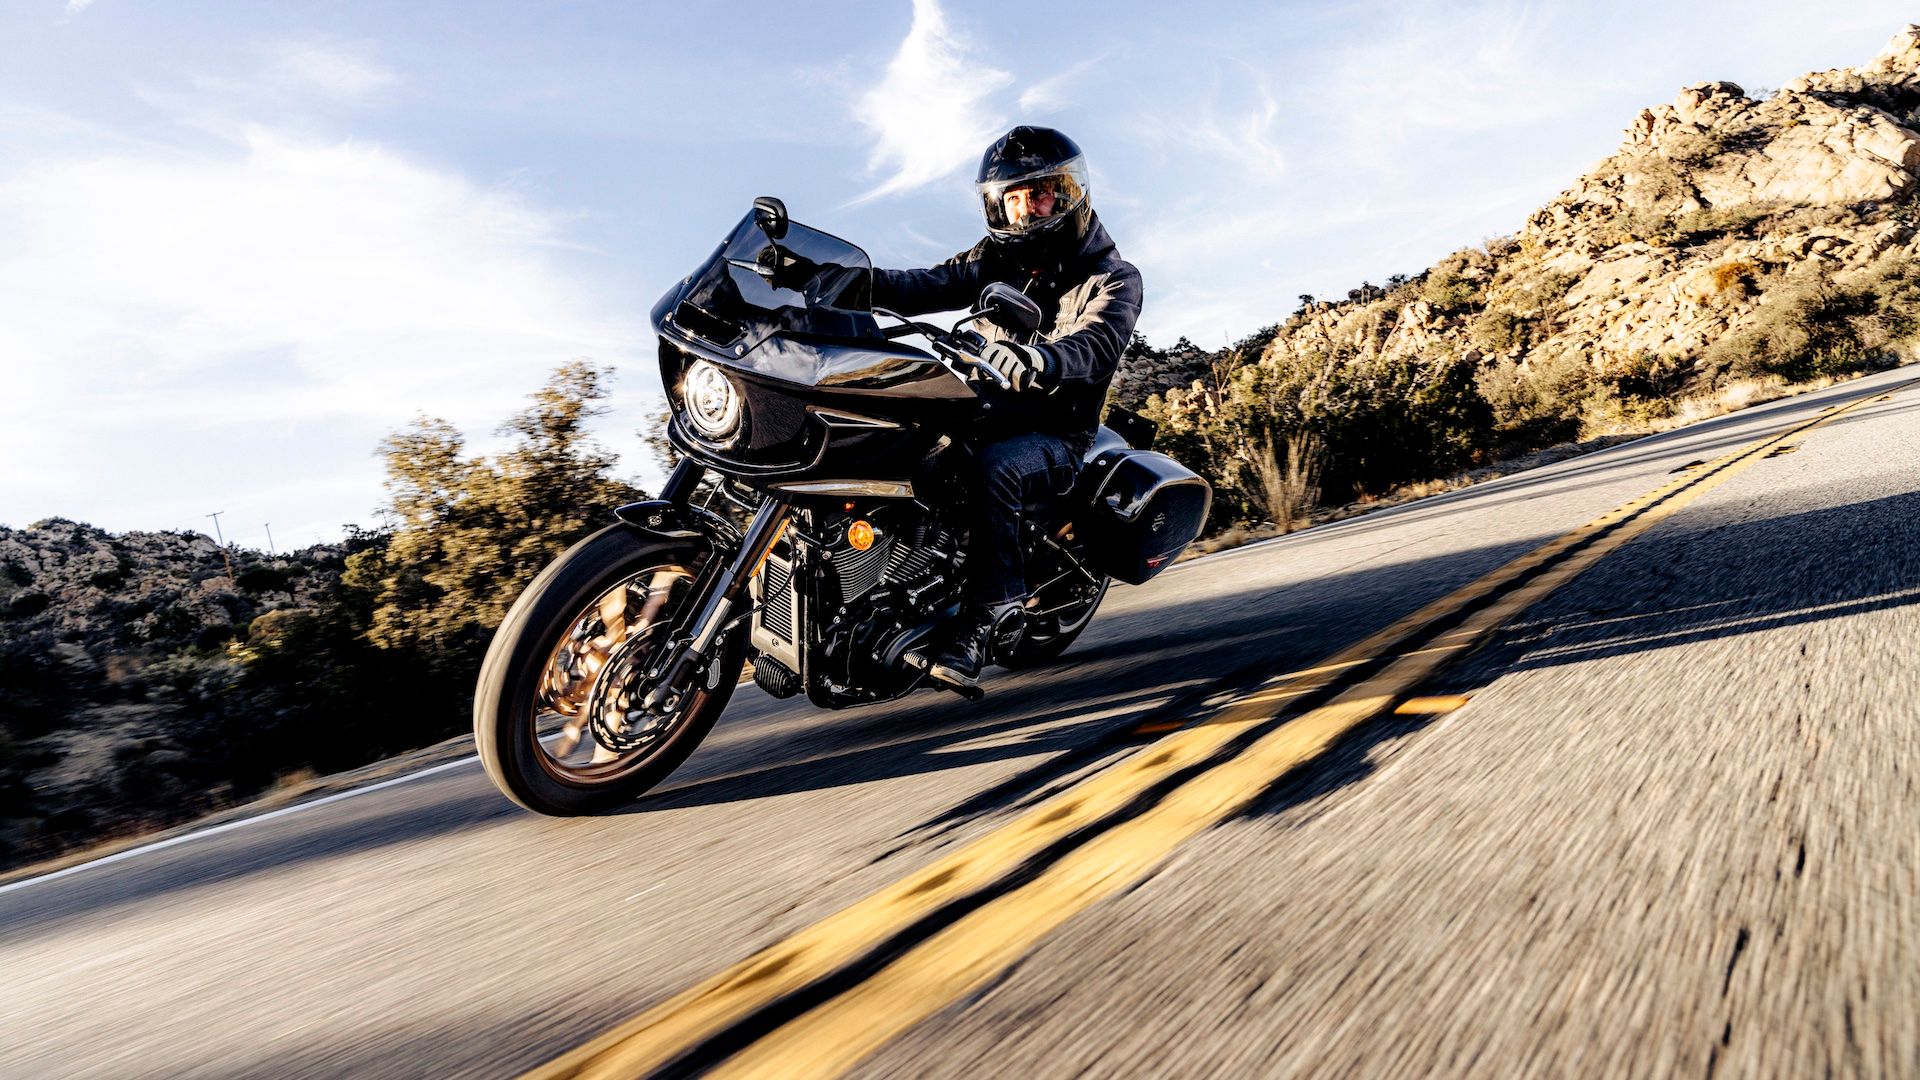 5 Reasons Why You Should Buy A New Motorcycle (And 5 Why Buying Used Is Better)